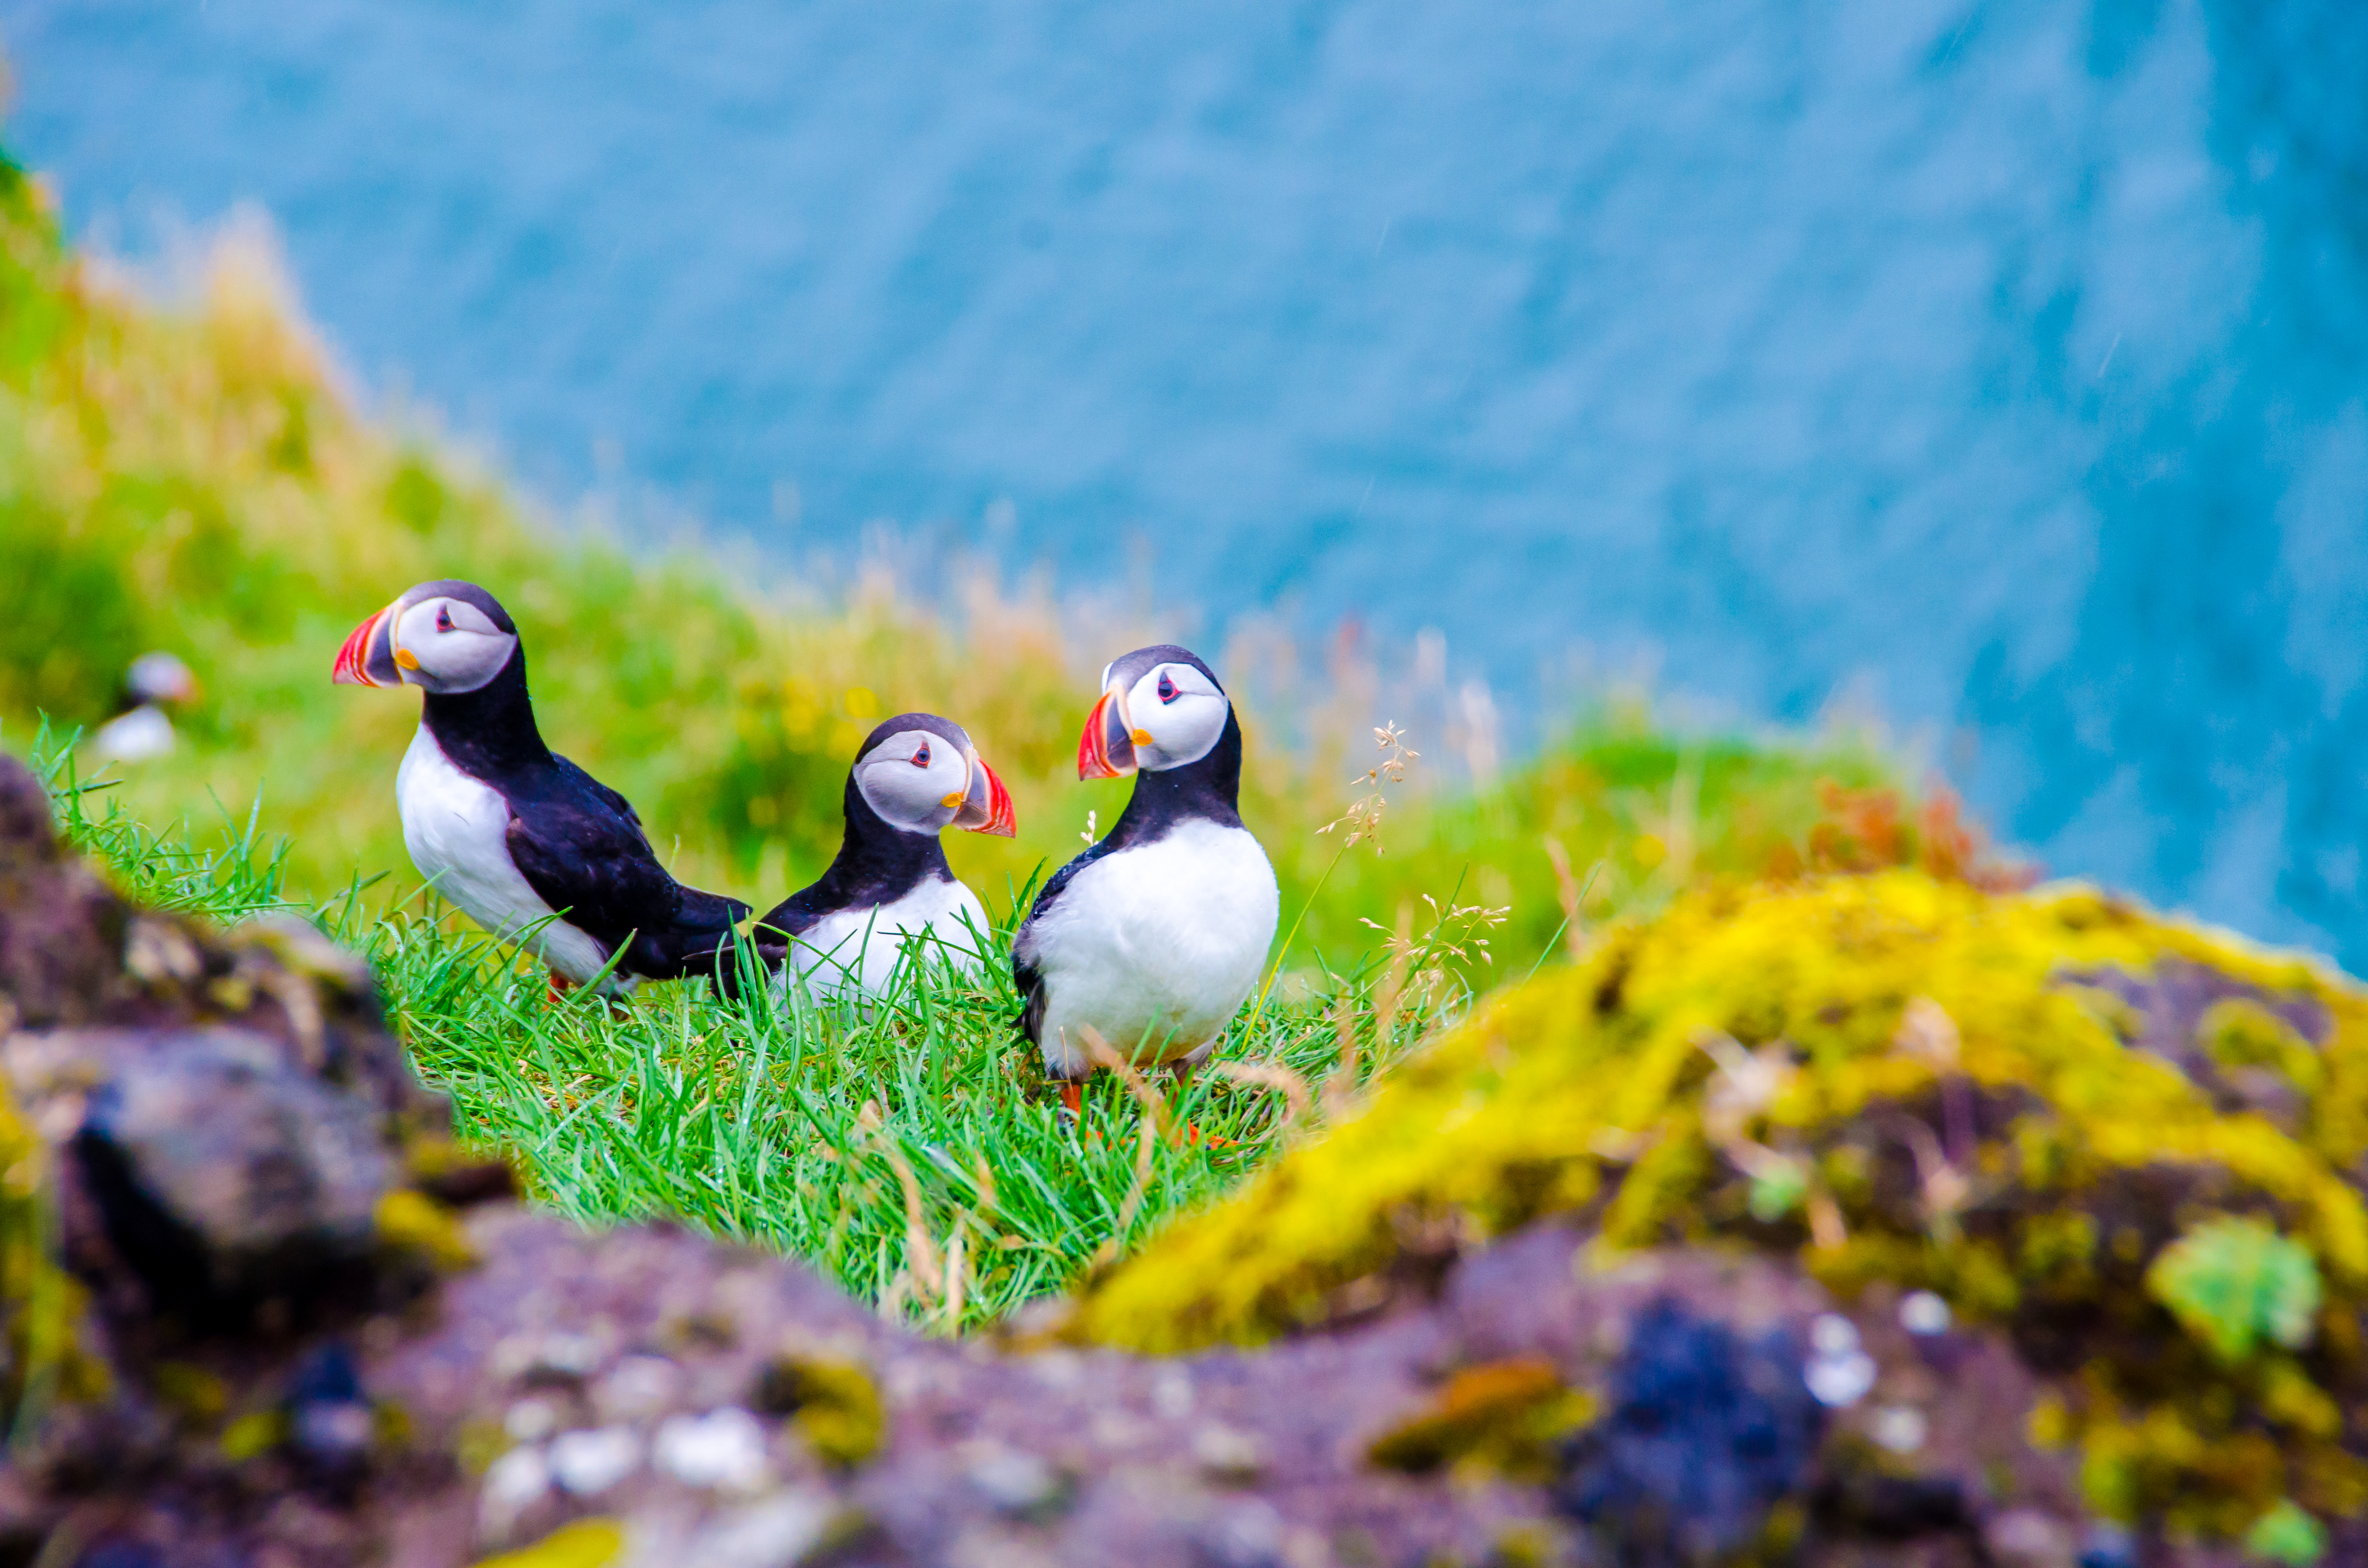 Plan Your Family Vacation in Iceland with My Travel Guide - Puffins on the Coast of Iceland